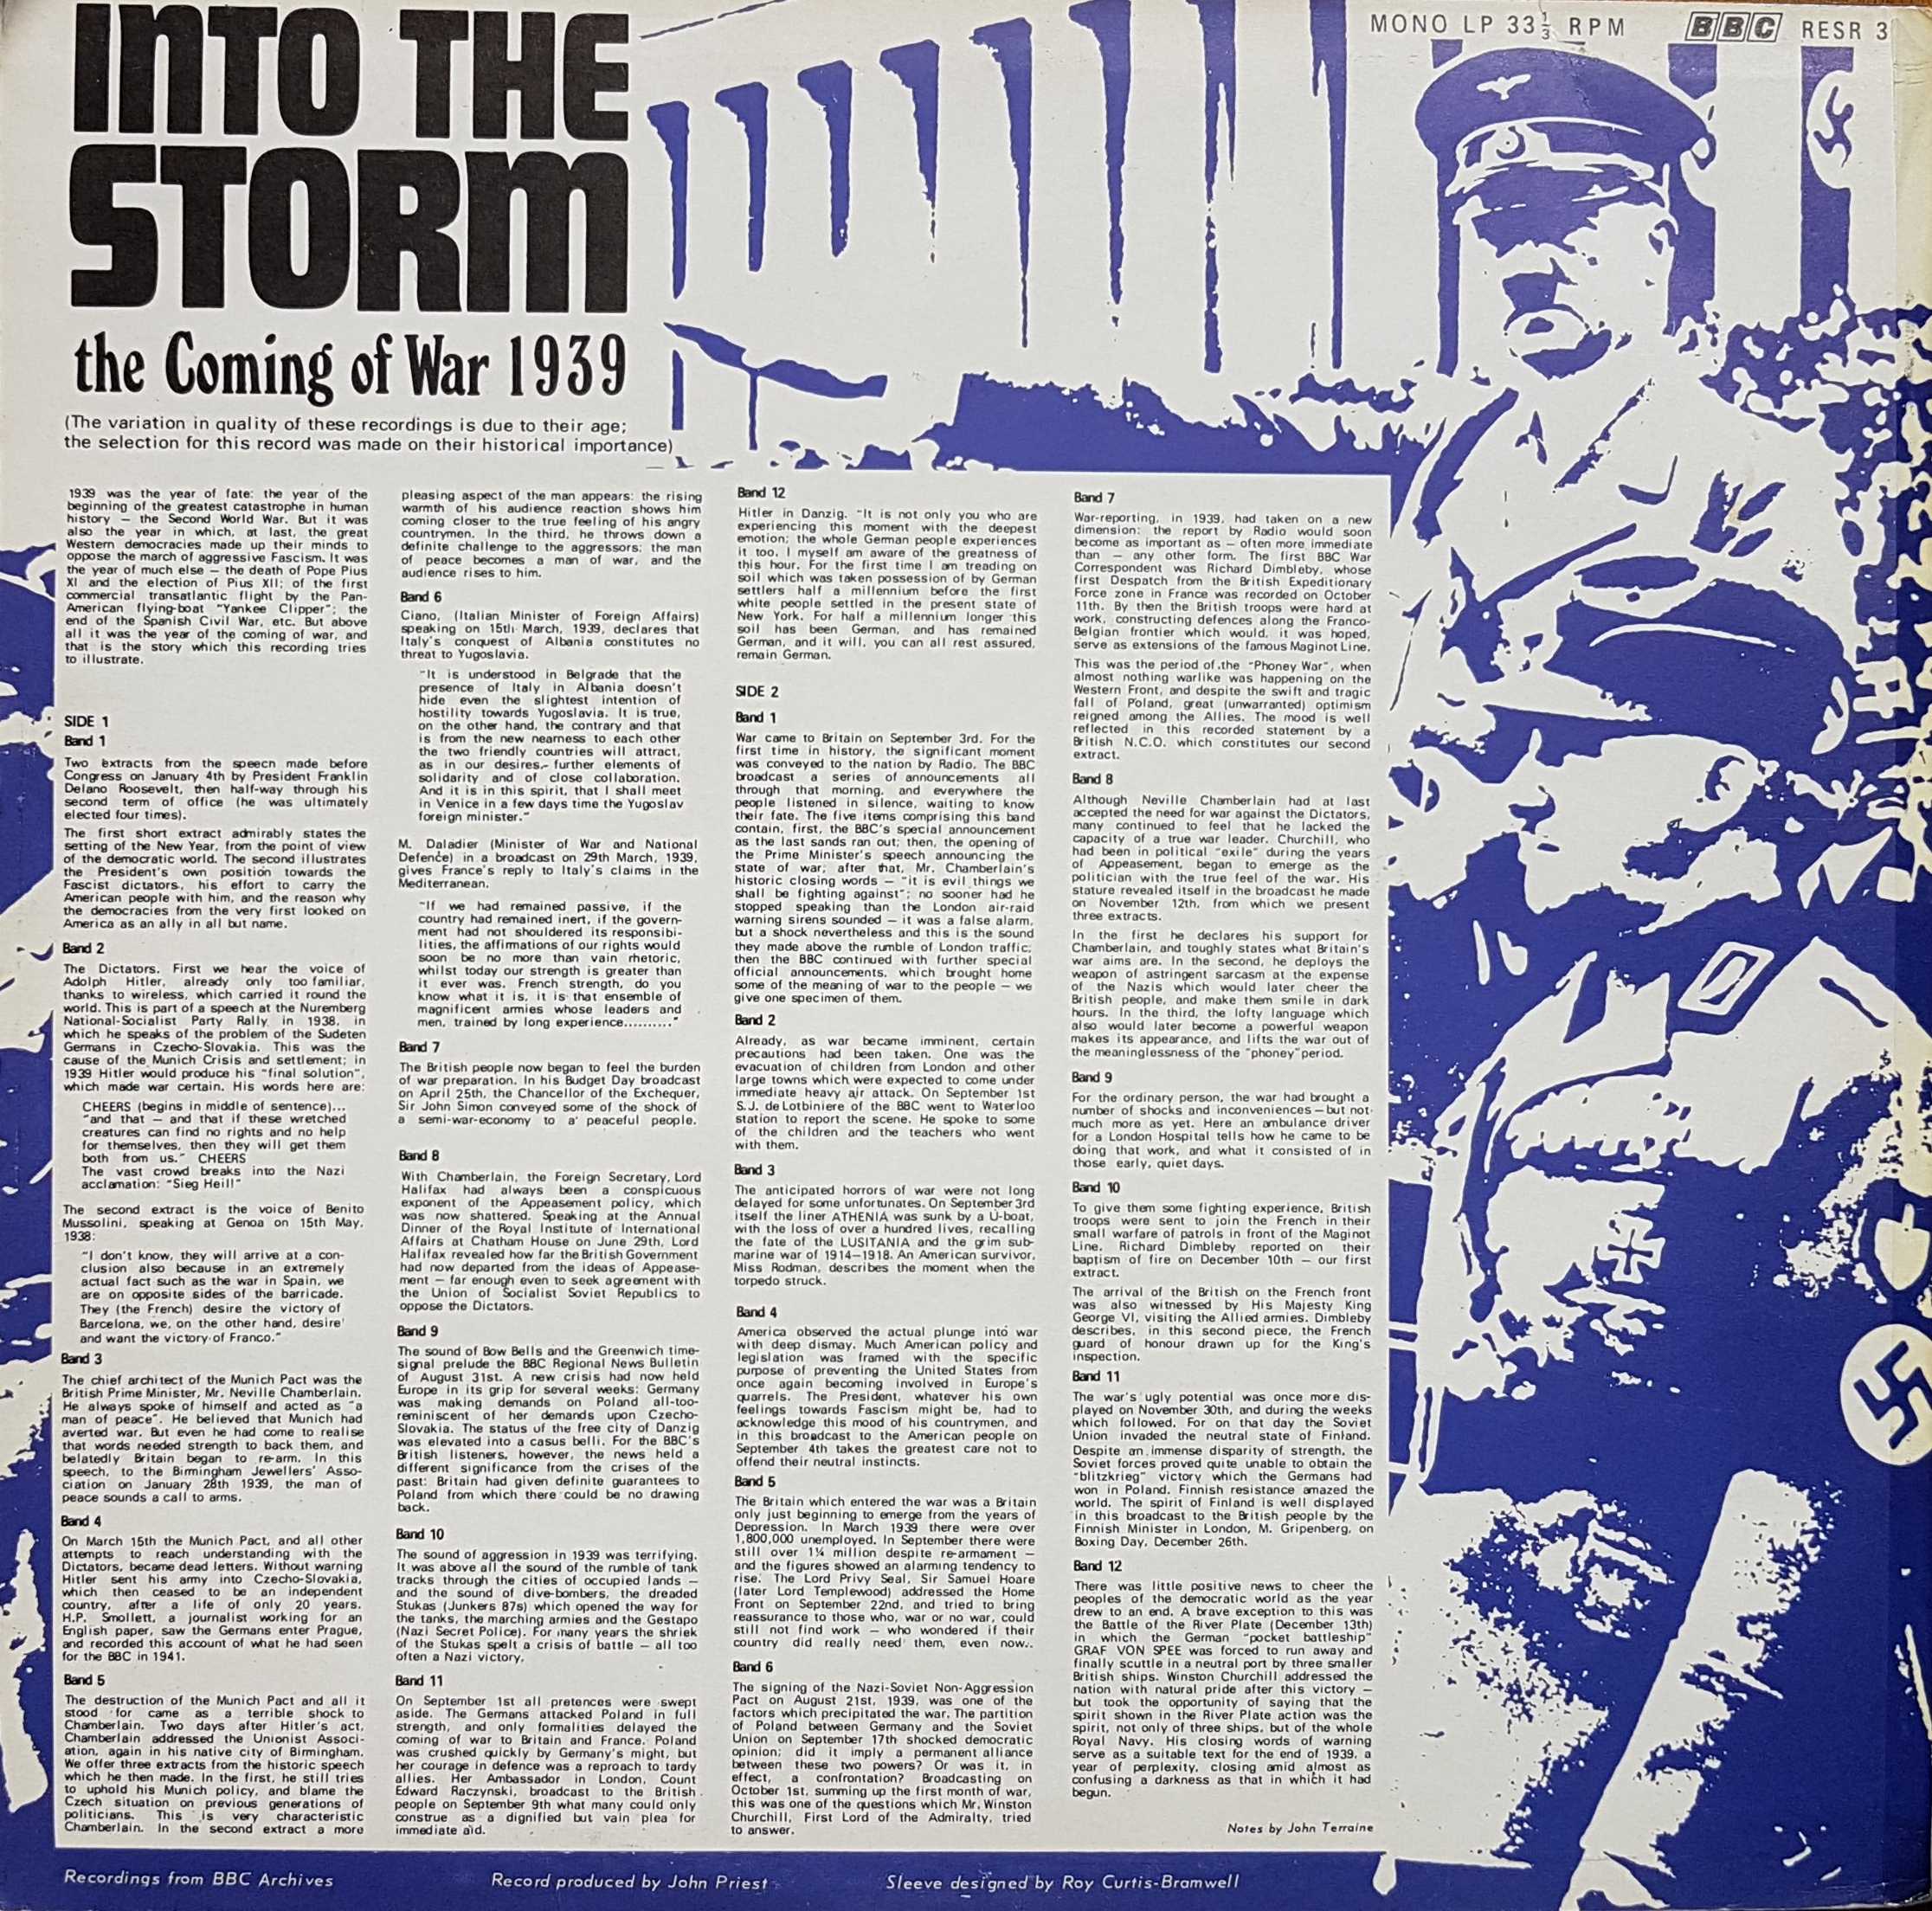 Picture of RESR 3 Into the storm - The coming of the war 1939 by artist Various from the BBC records and Tapes library